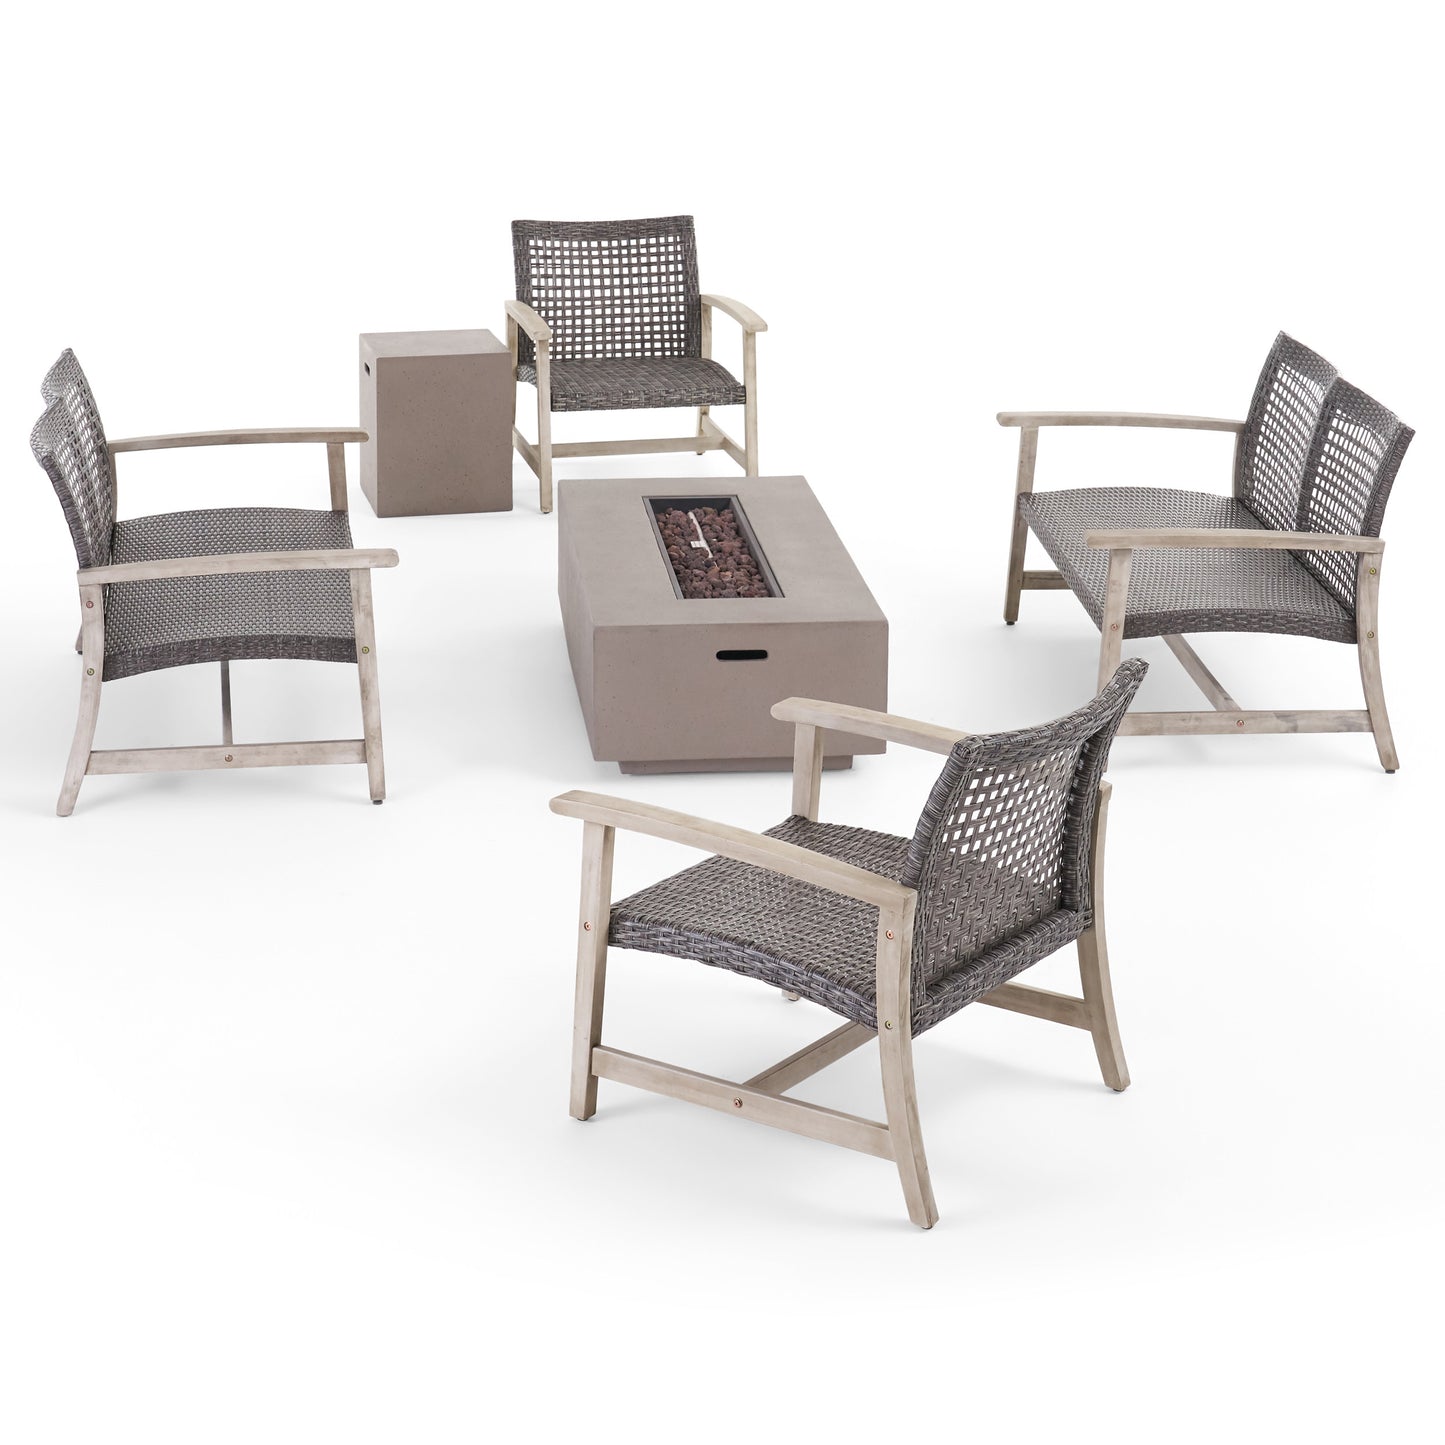 Tabby Outdoor 6 Seater Wood and Wicker Chat Set with Fire Pit